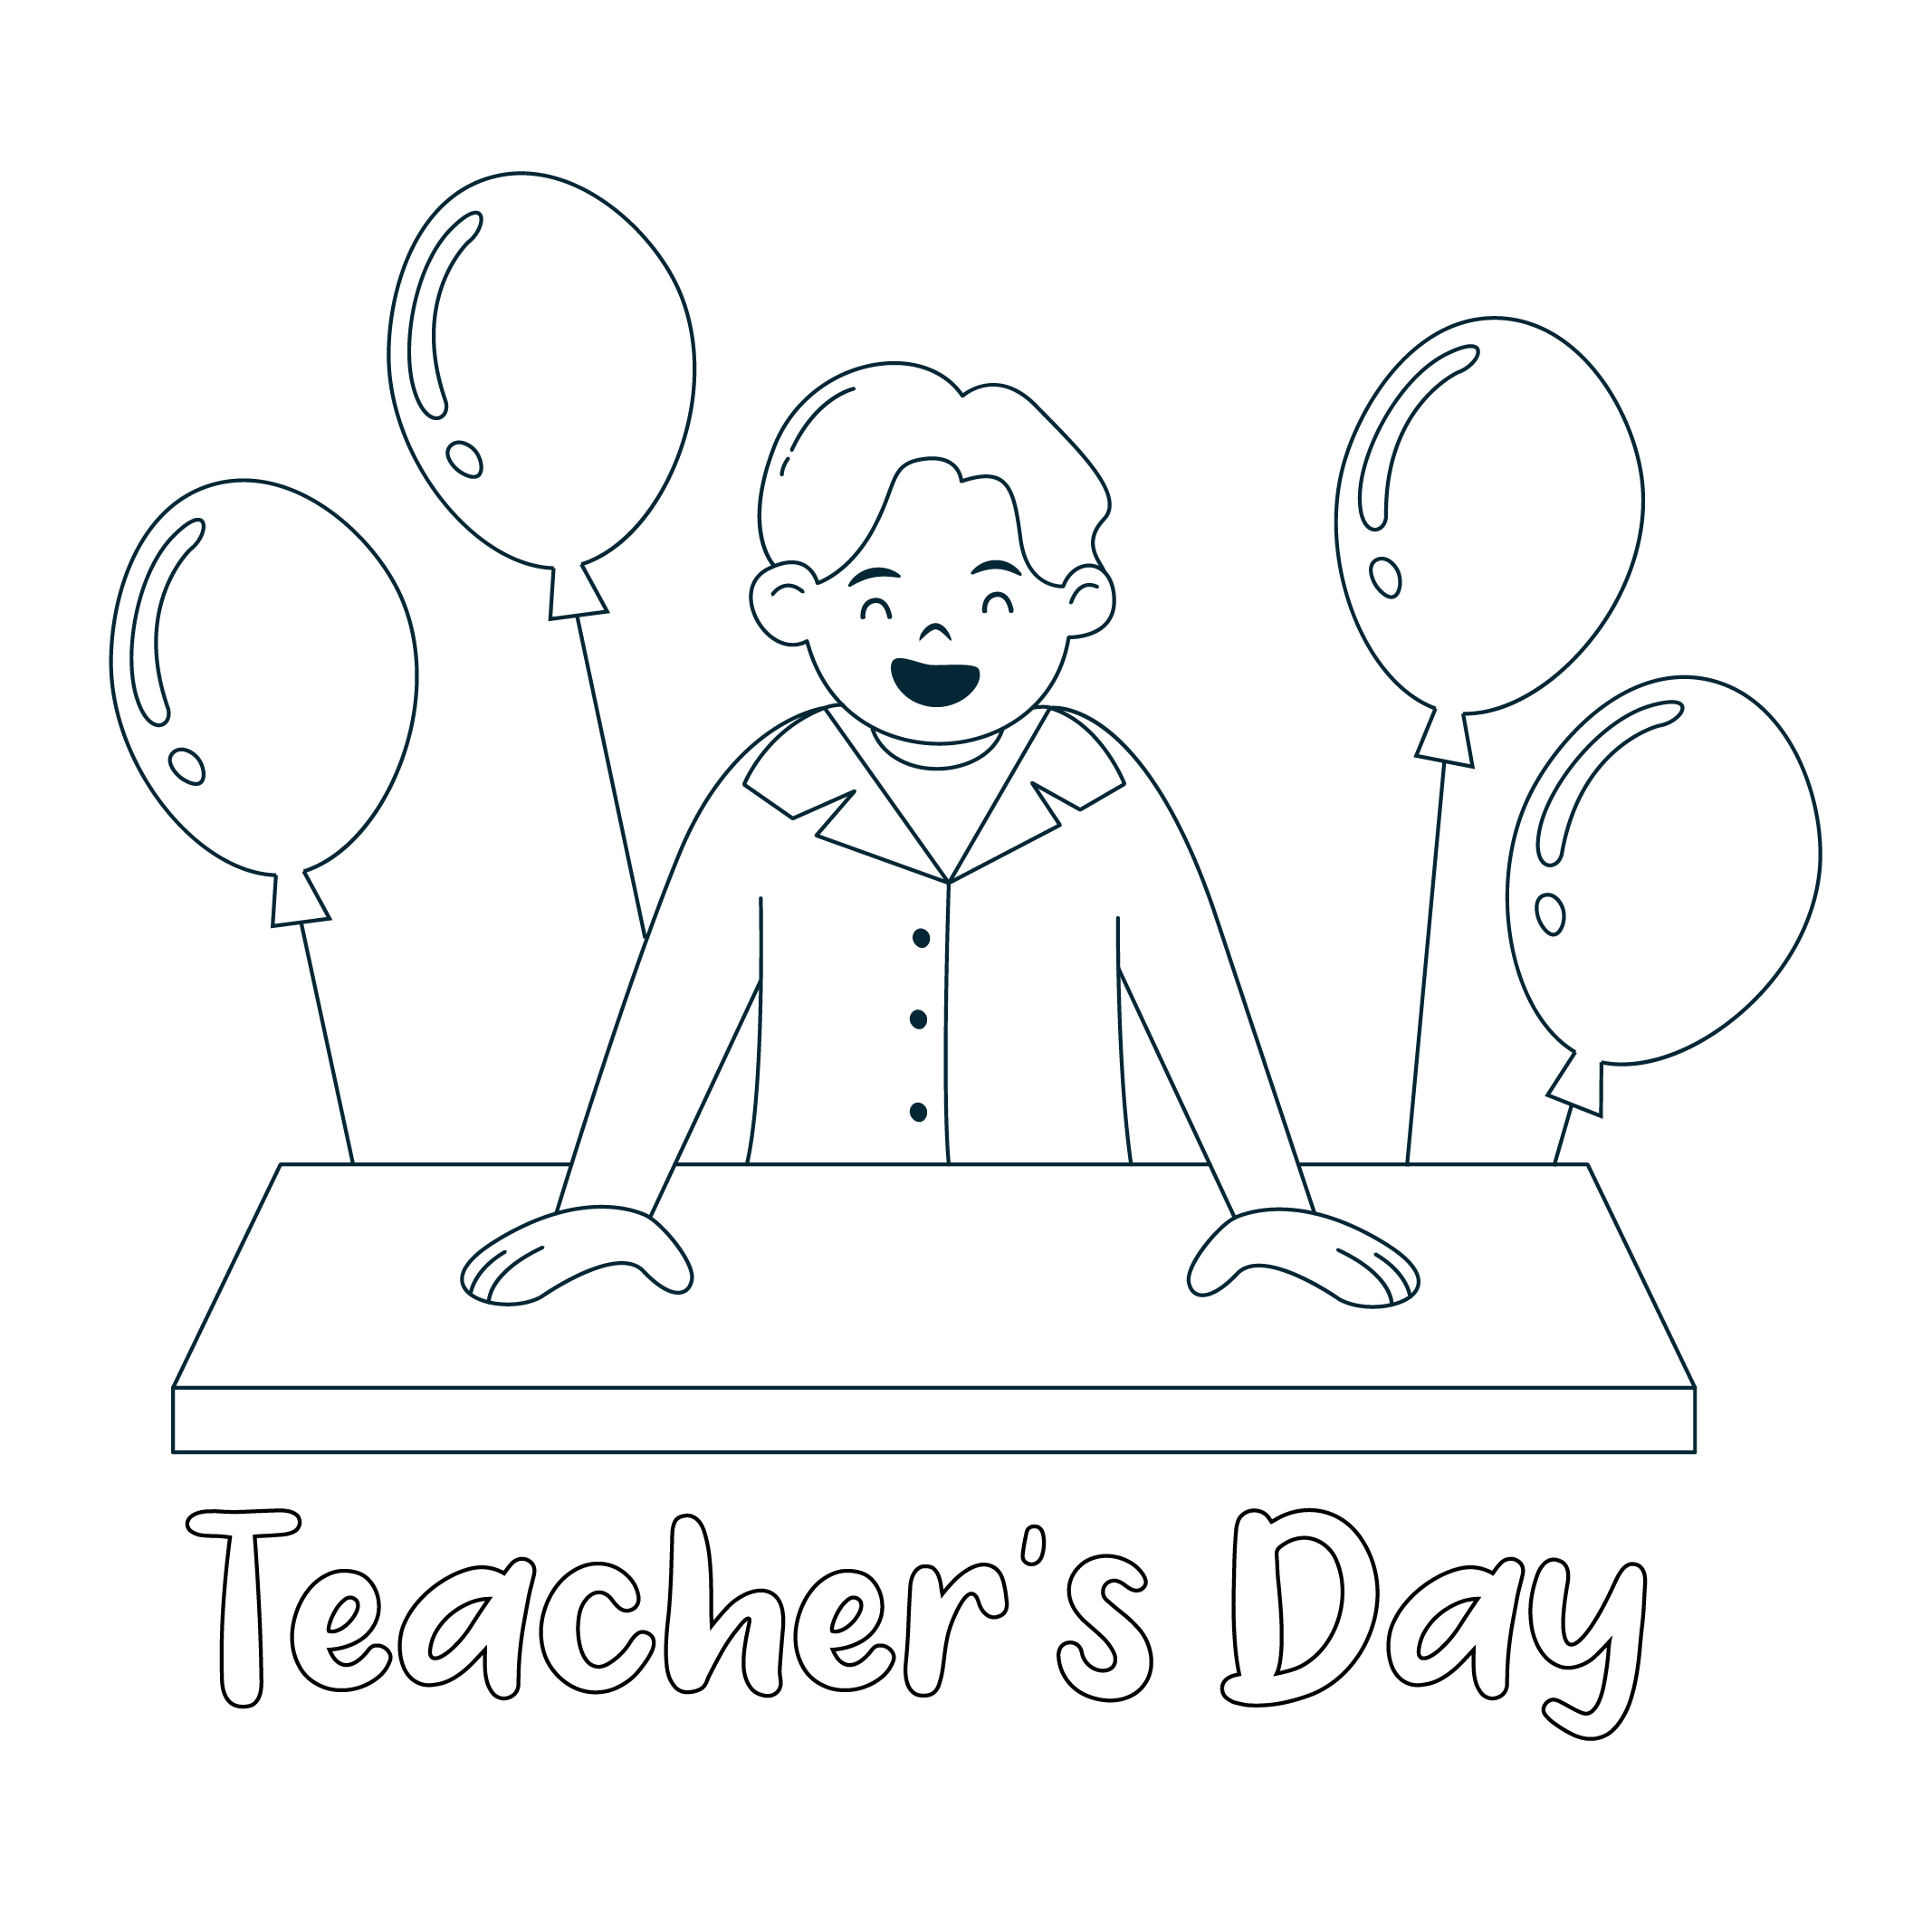 Teachers Day Special Drawing || Happy Teachers Day Drawing || Teachers Day  Card Drawing.. - YouTube